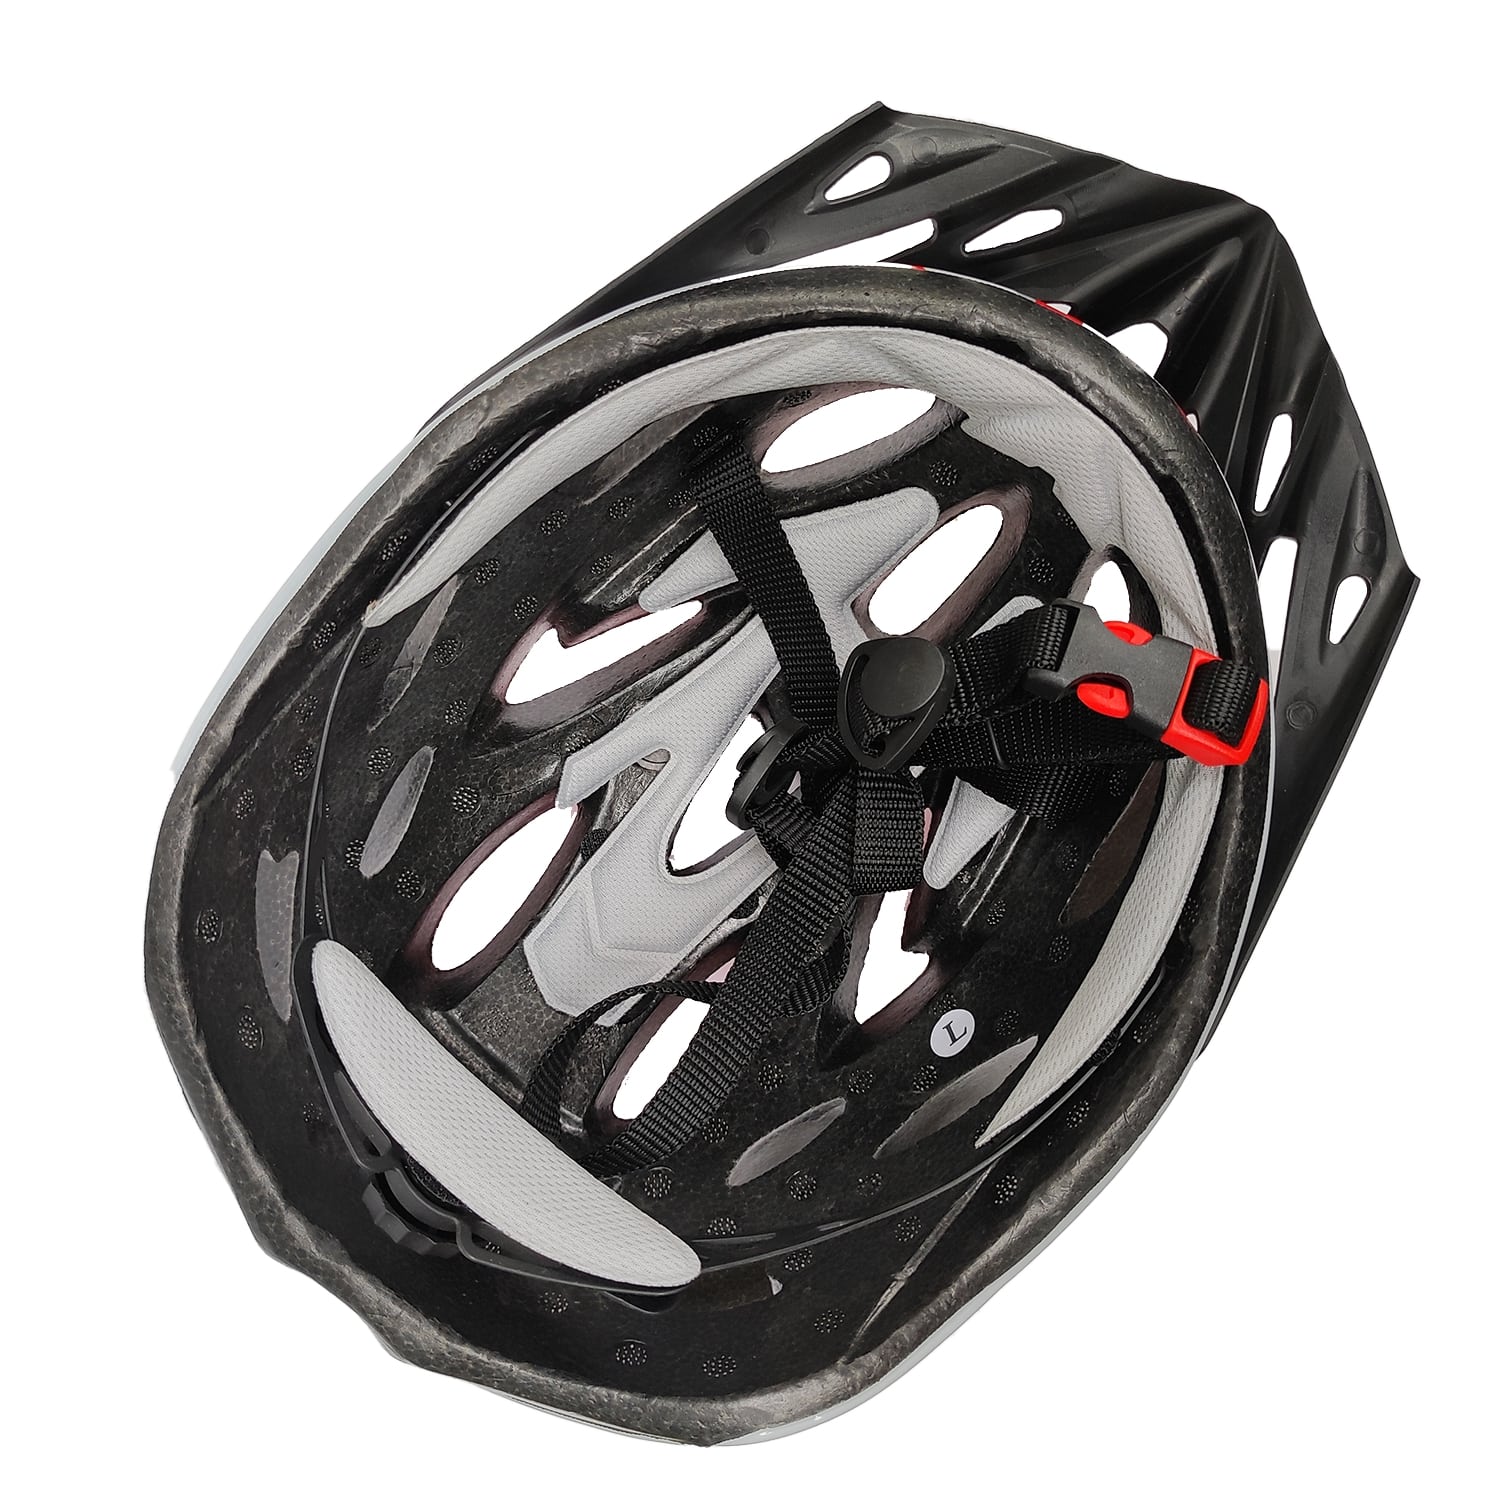 Shop Online Bicycle Helmet Safety Gear by omo bikes for hybrid or mtb cycle top vide